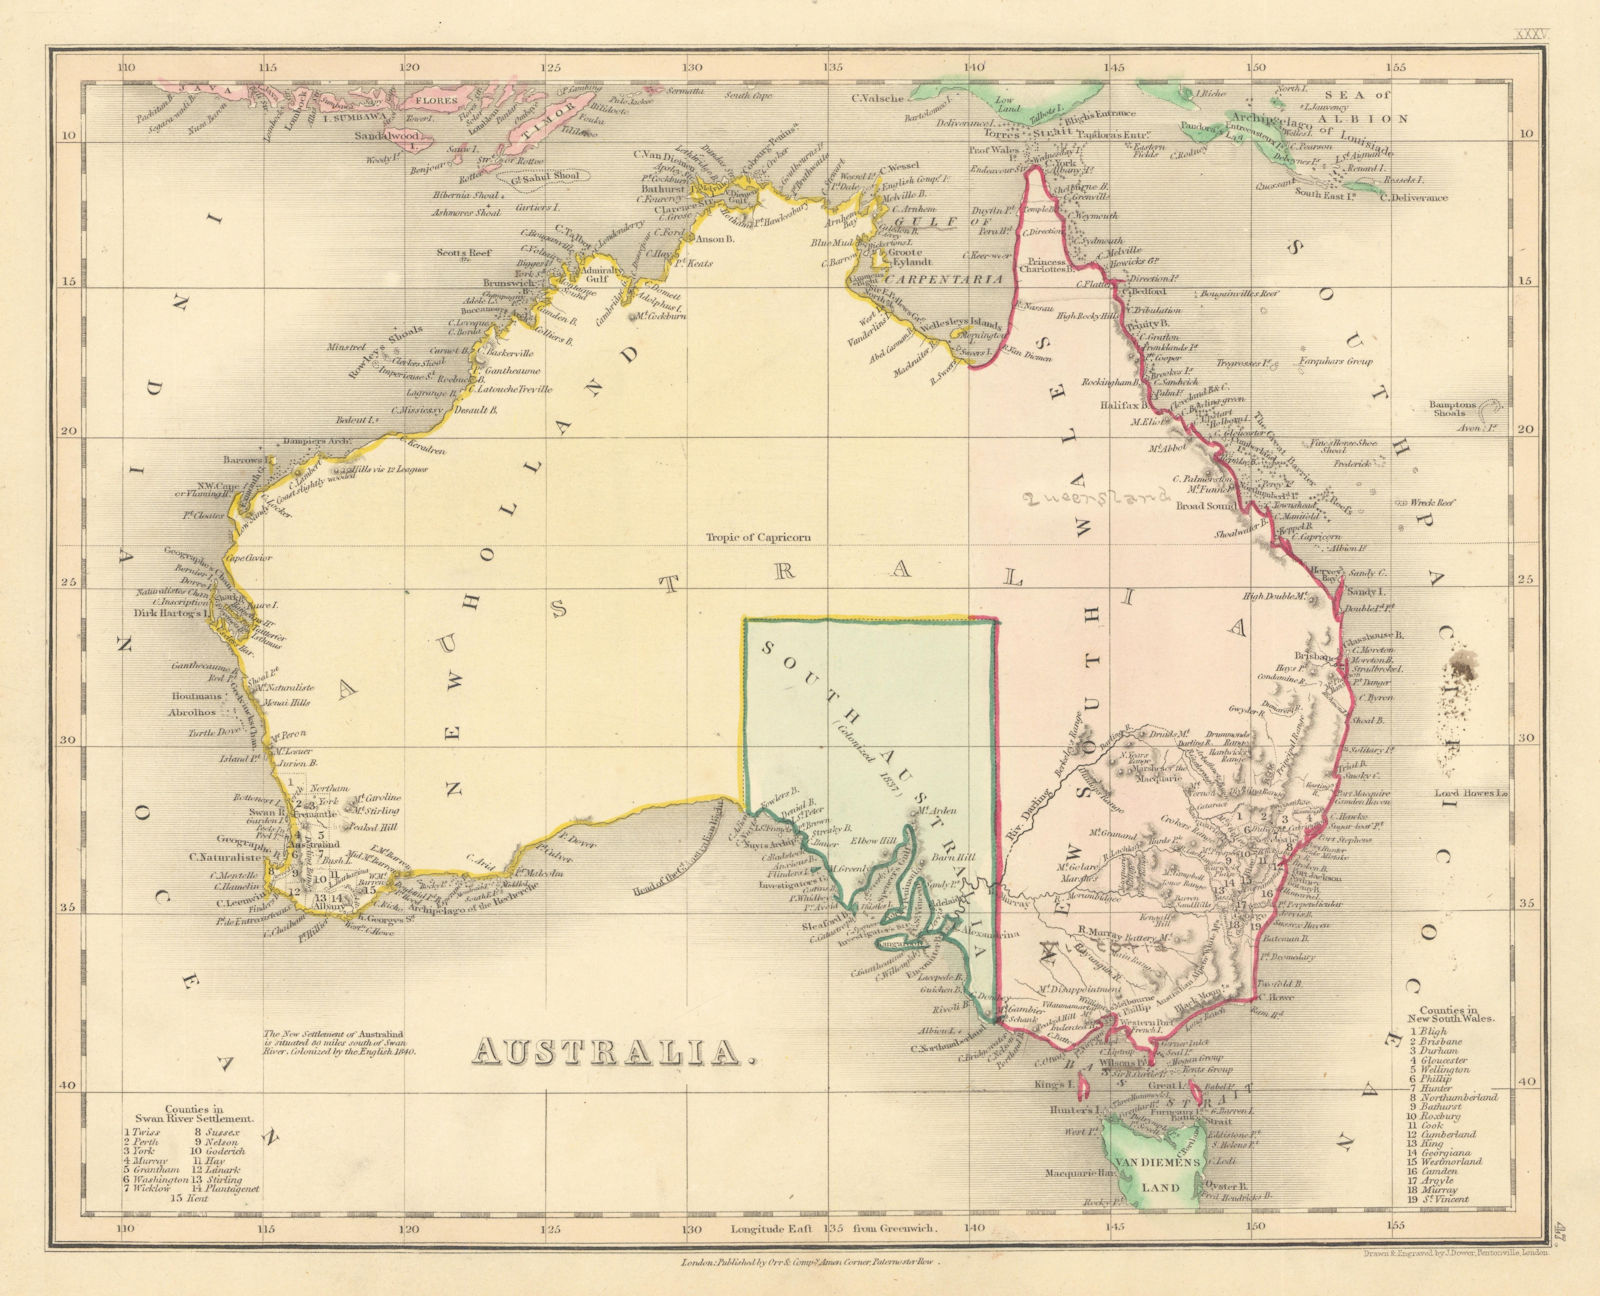 Australia by John Dower. New Holland New South Wales 1845 old antique map